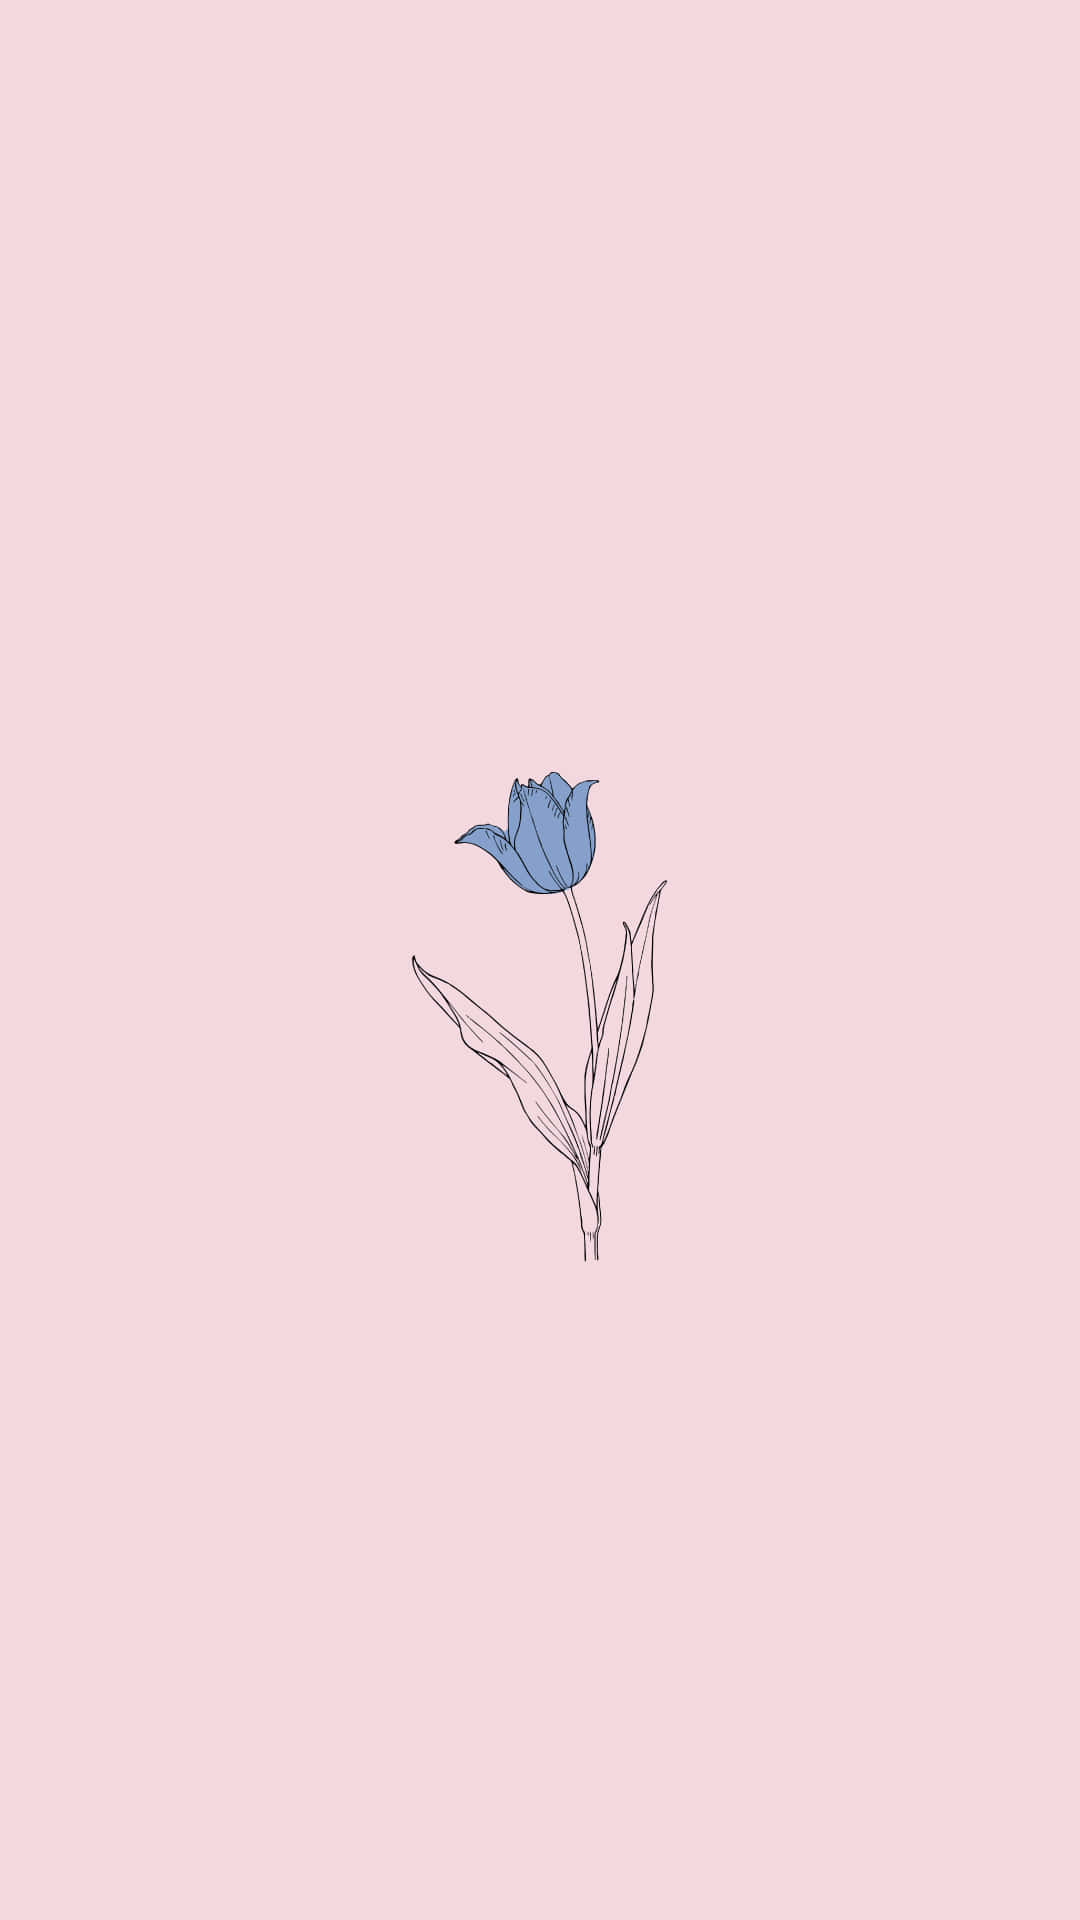 A Blue Flower On A Pink Background Wallpaper